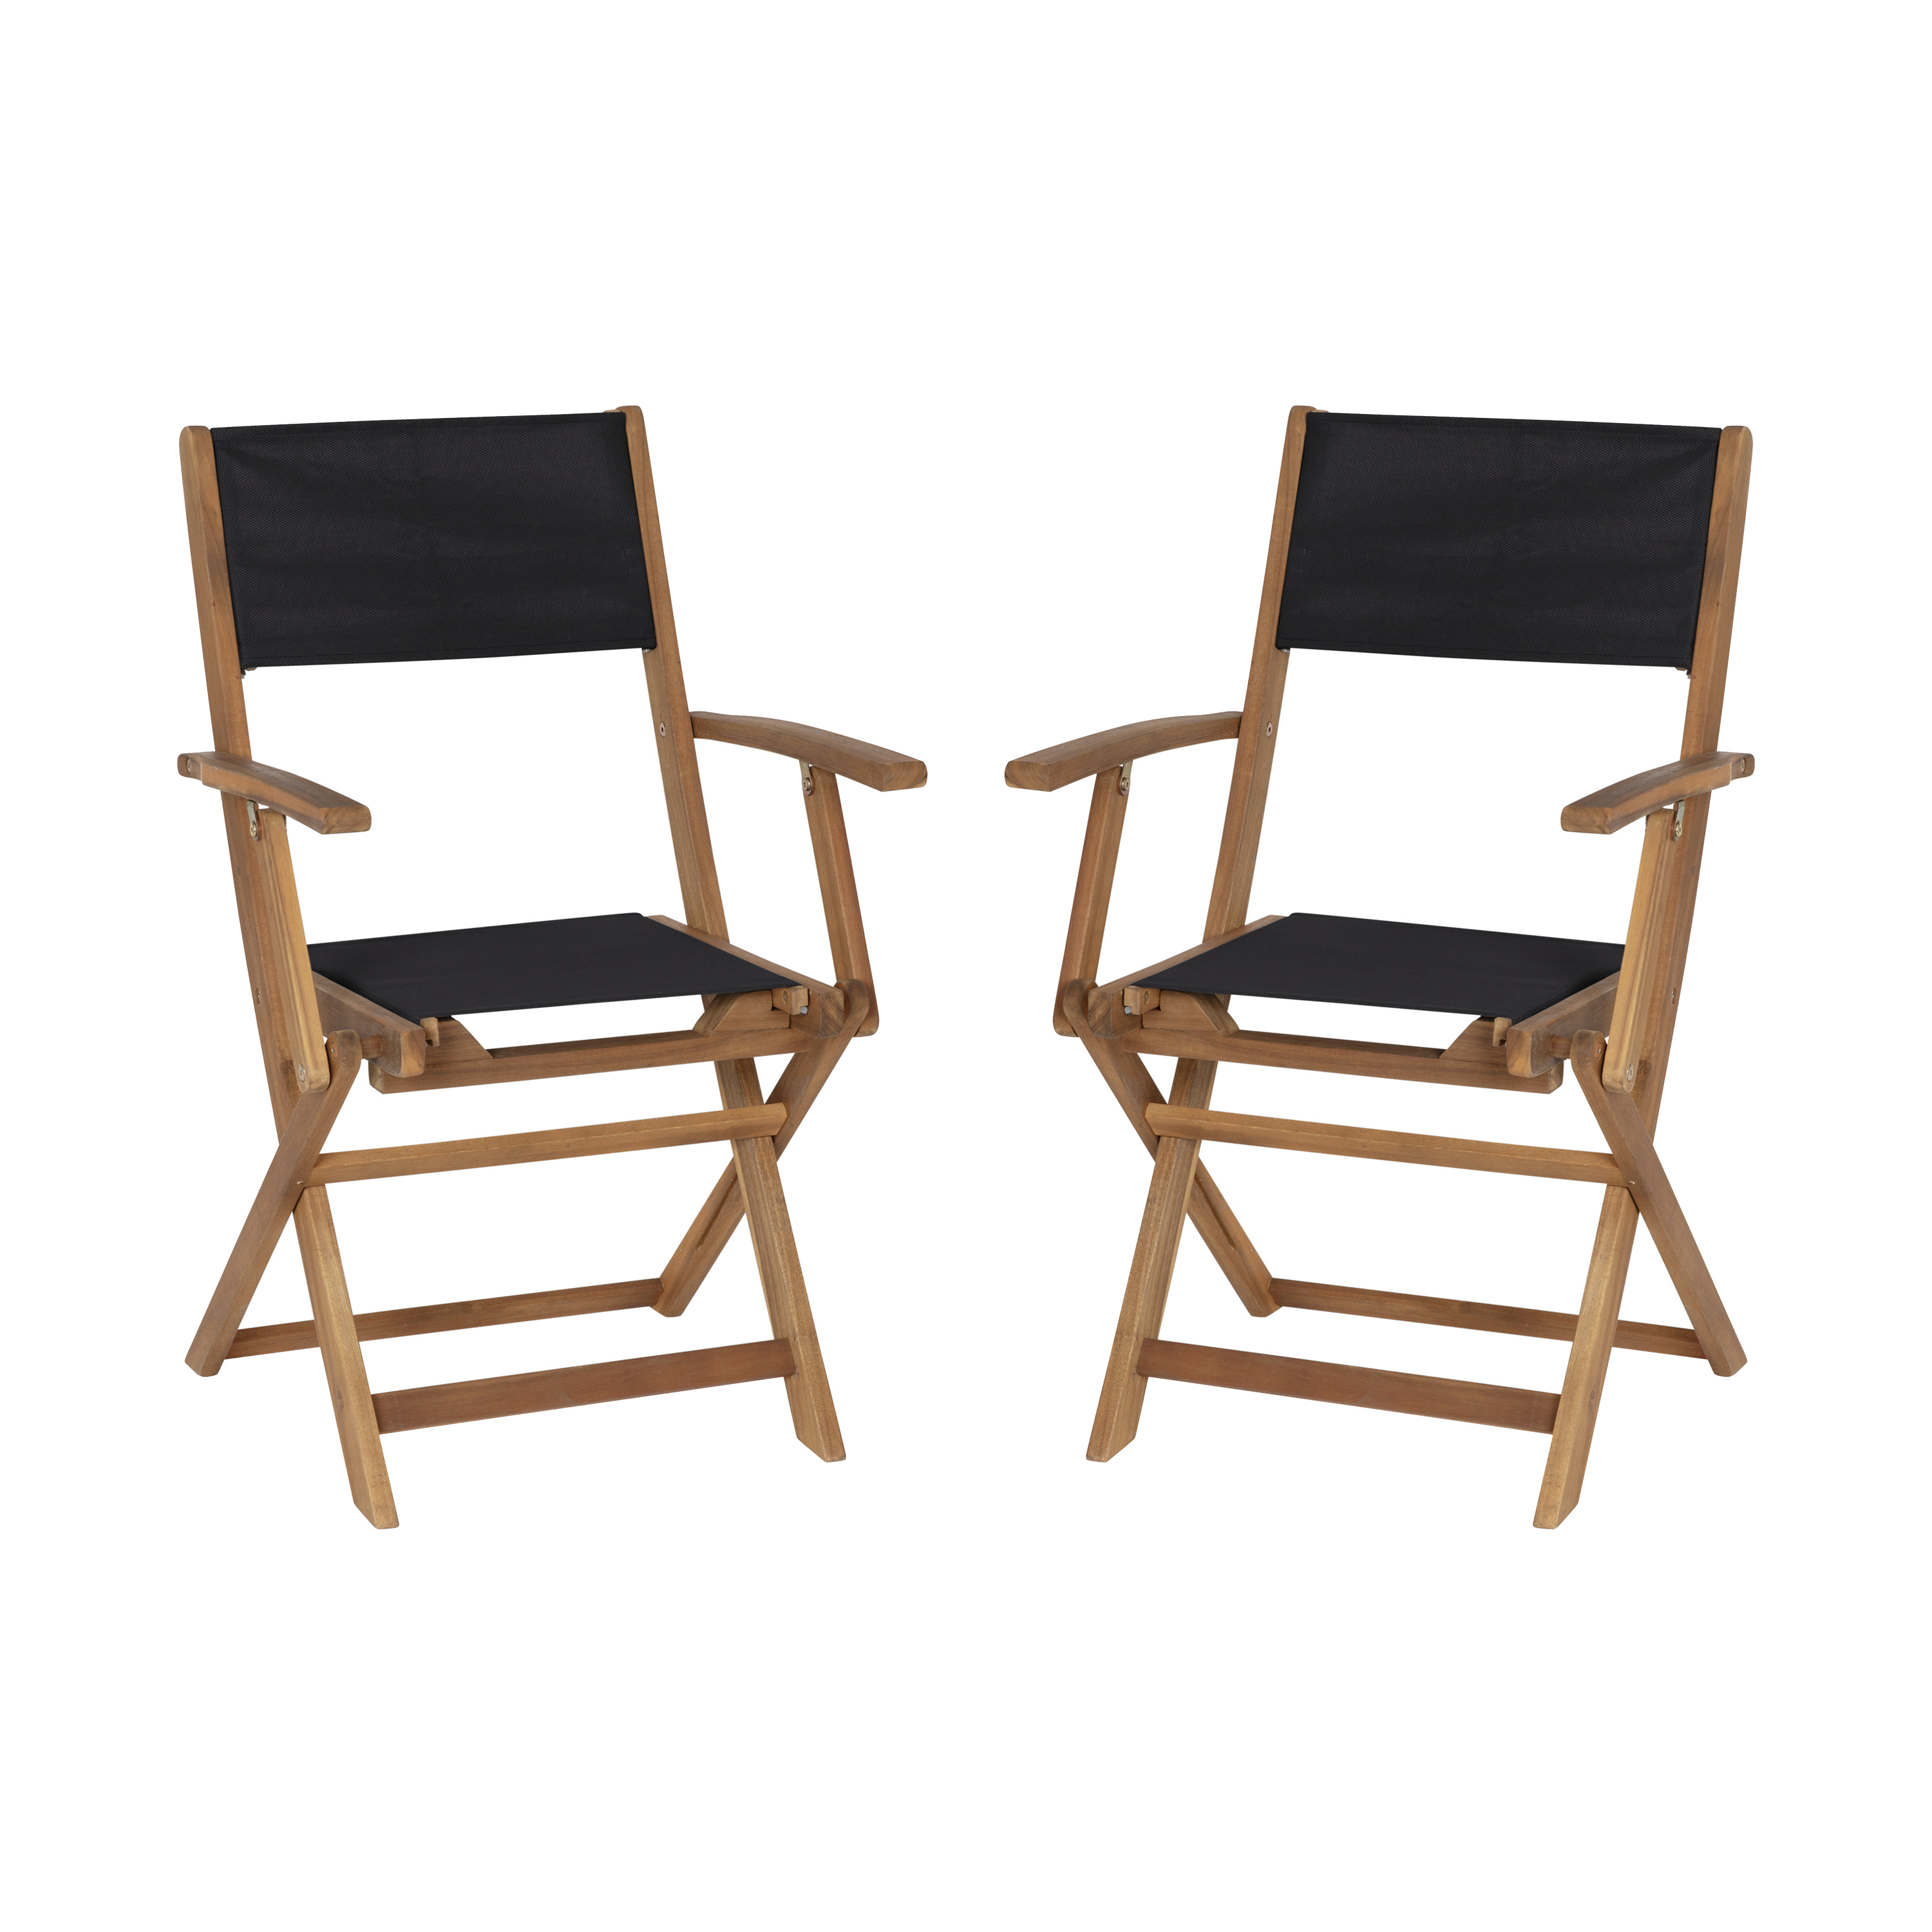 Flash Furniture THB-AC4854-NAT-GG Folding Acacia Wood Patio Bistro Chair with Arms, Black Textilene Back and Seat, Set of 2